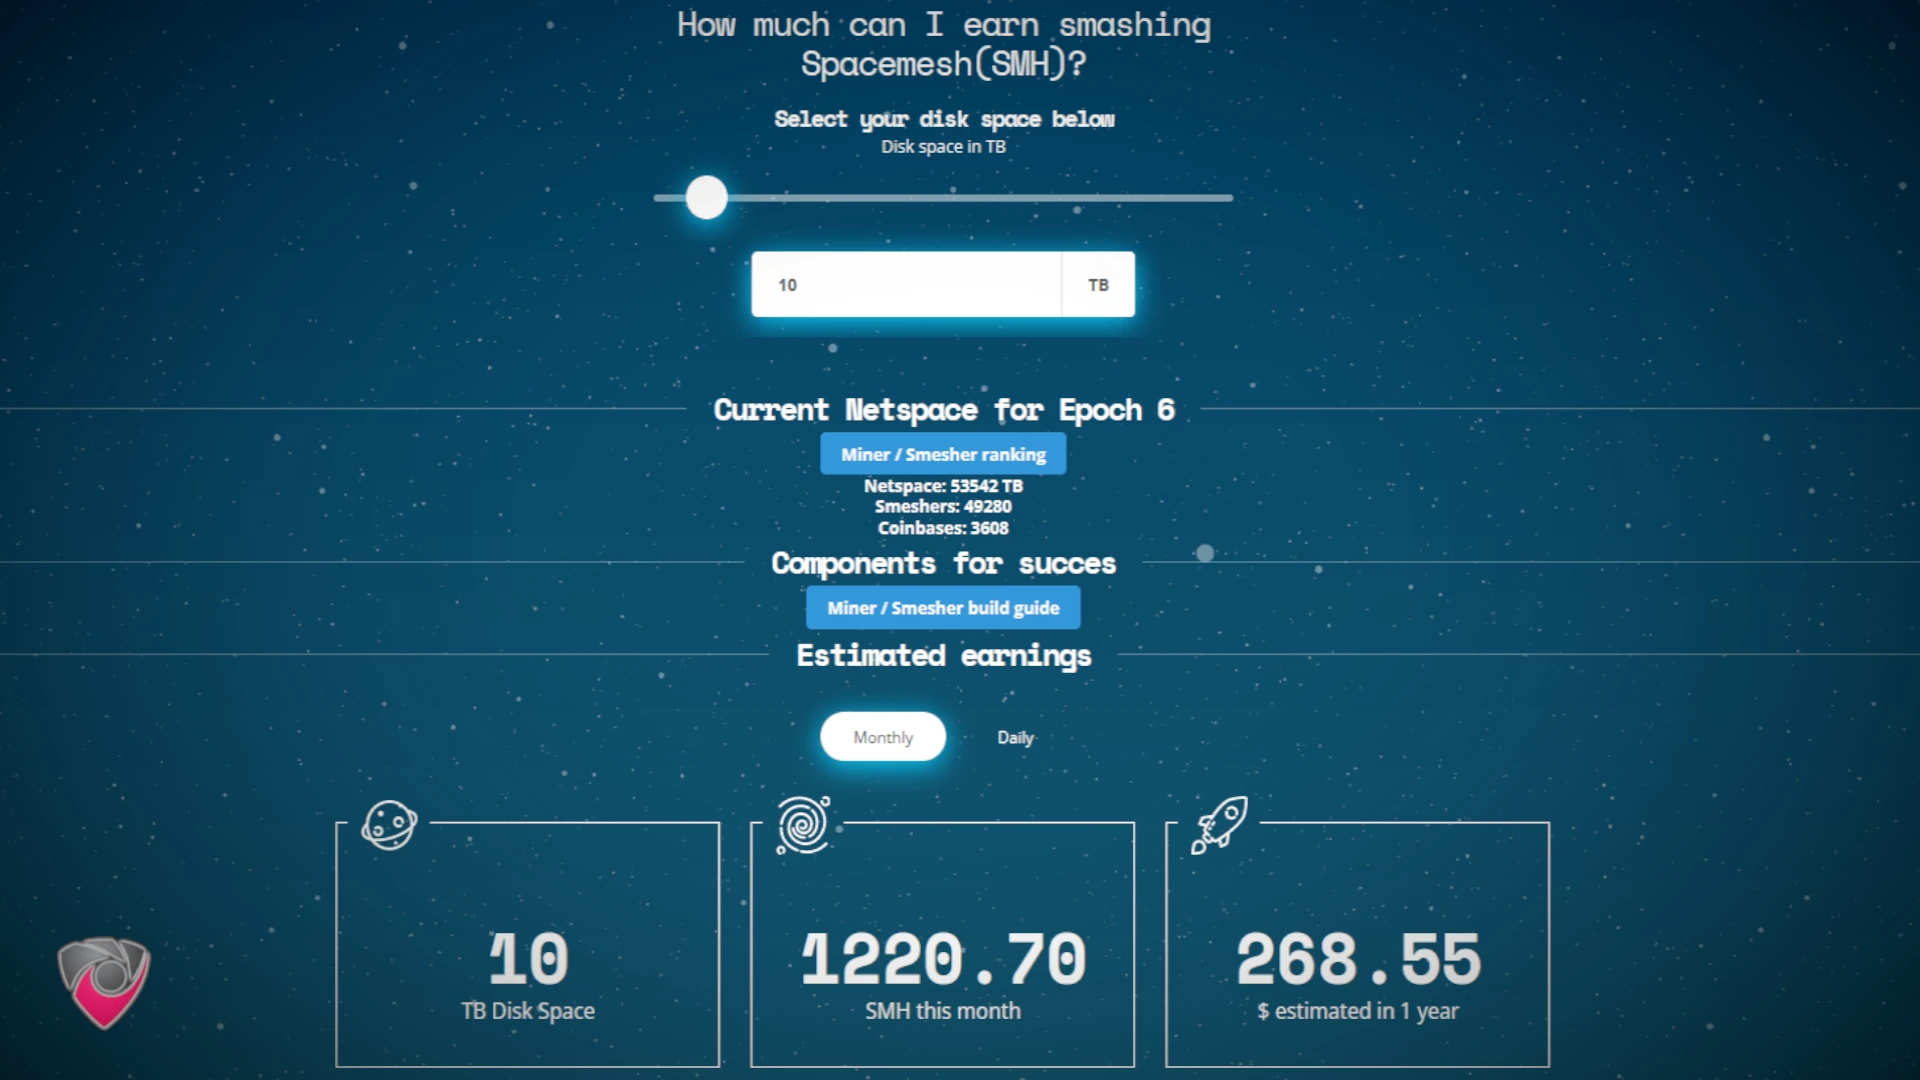 A image of the website spacemeshcalculator.com